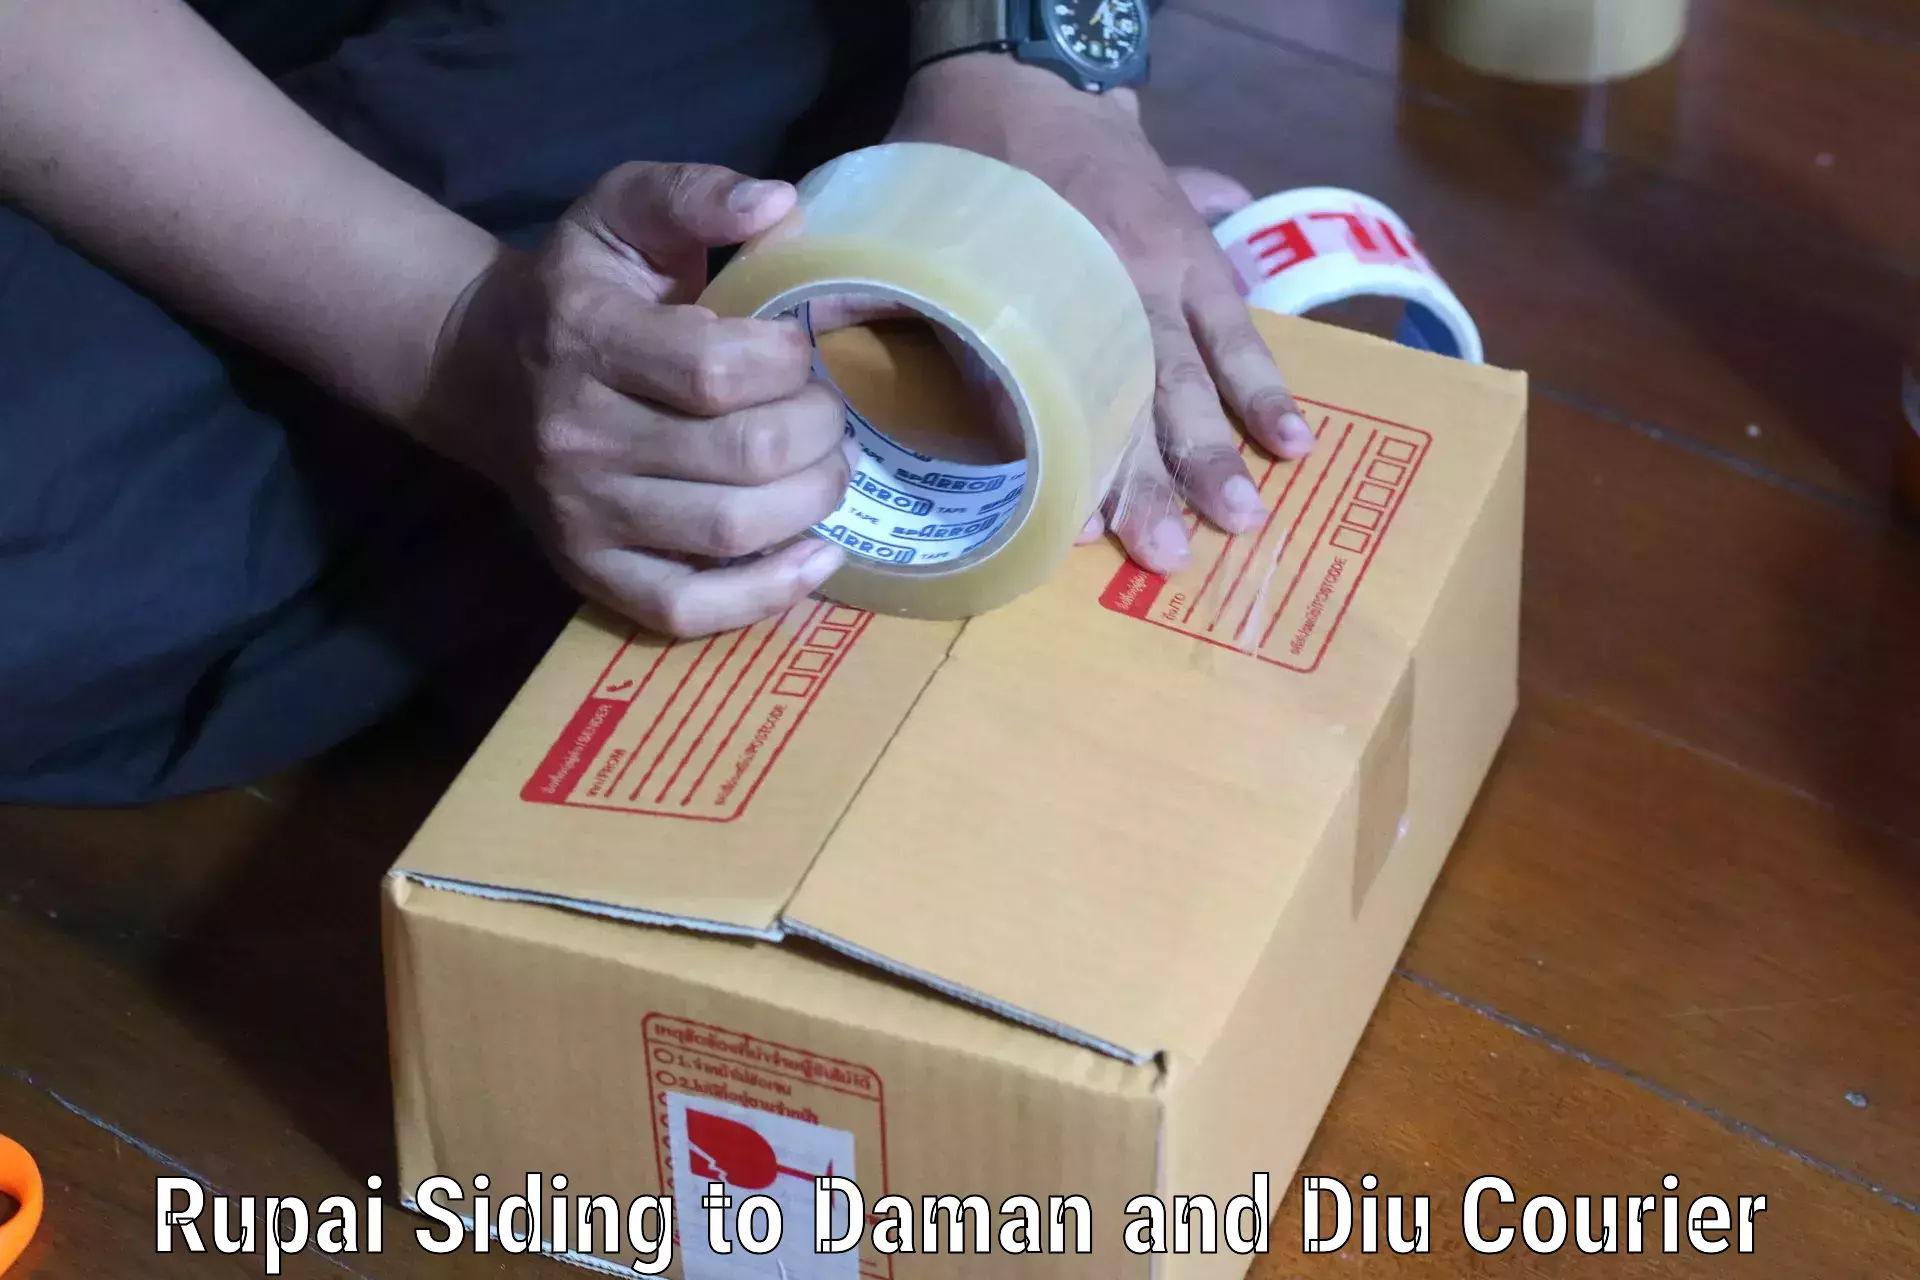 Courier service efficiency Rupai Siding to Daman